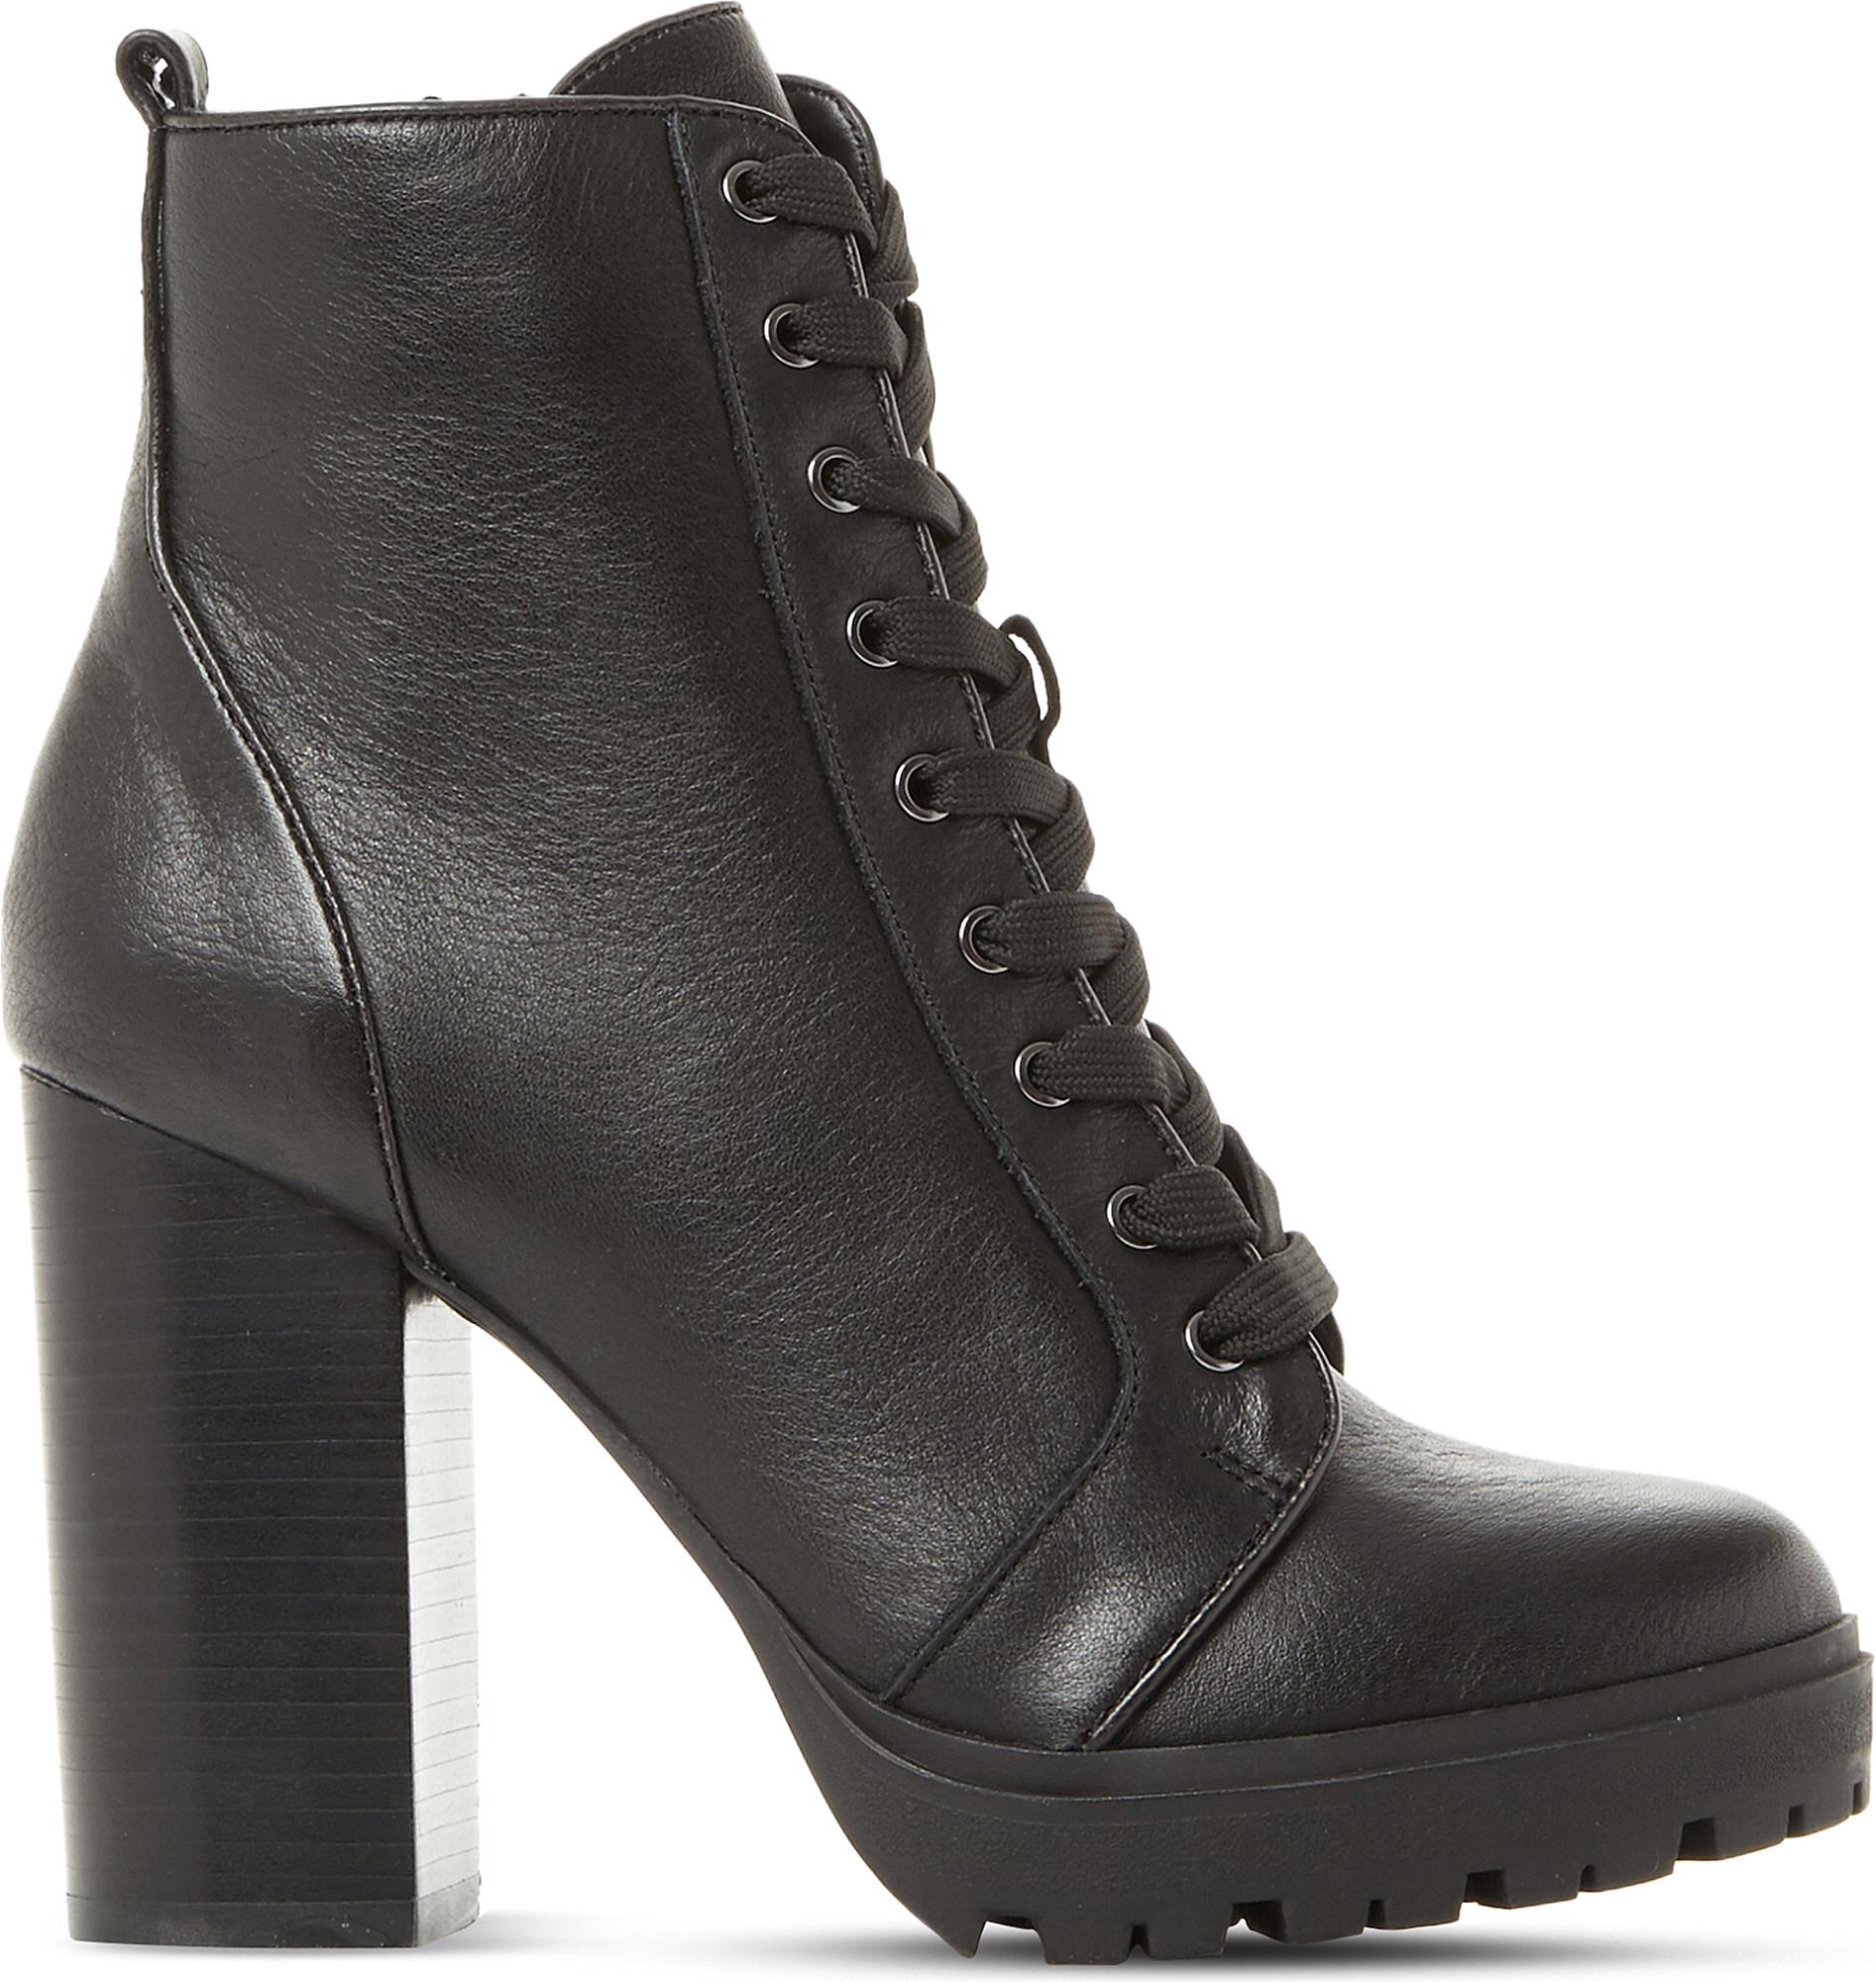 Steve Madden Laurie Leather Heeled Ankle Boots in Black - Lyst